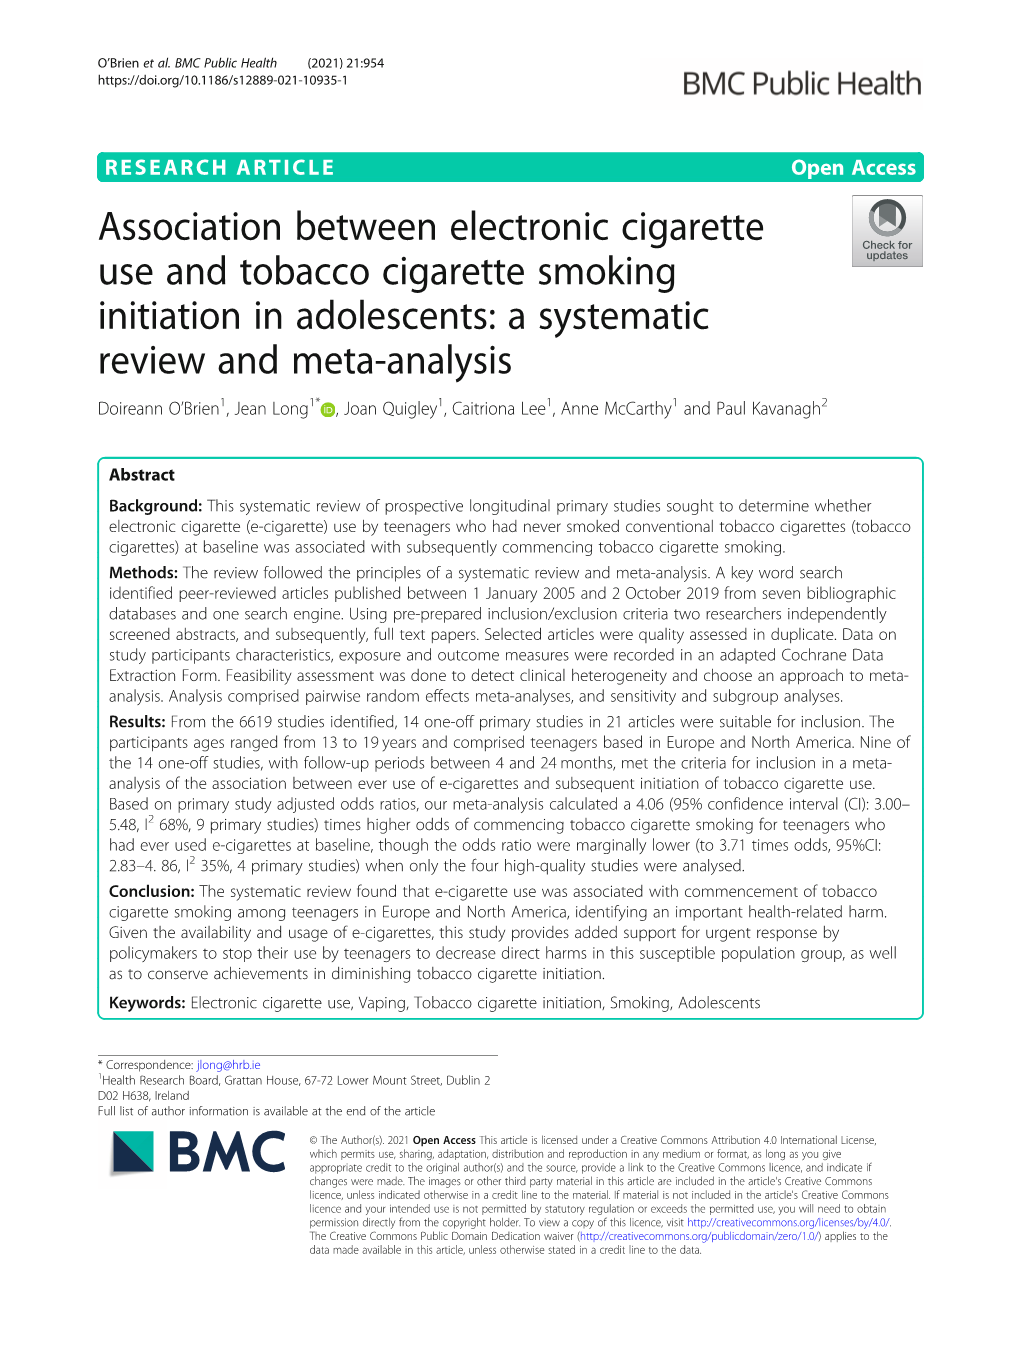 Association Between Electronic Cigarette Use and Tobacco Cigarette